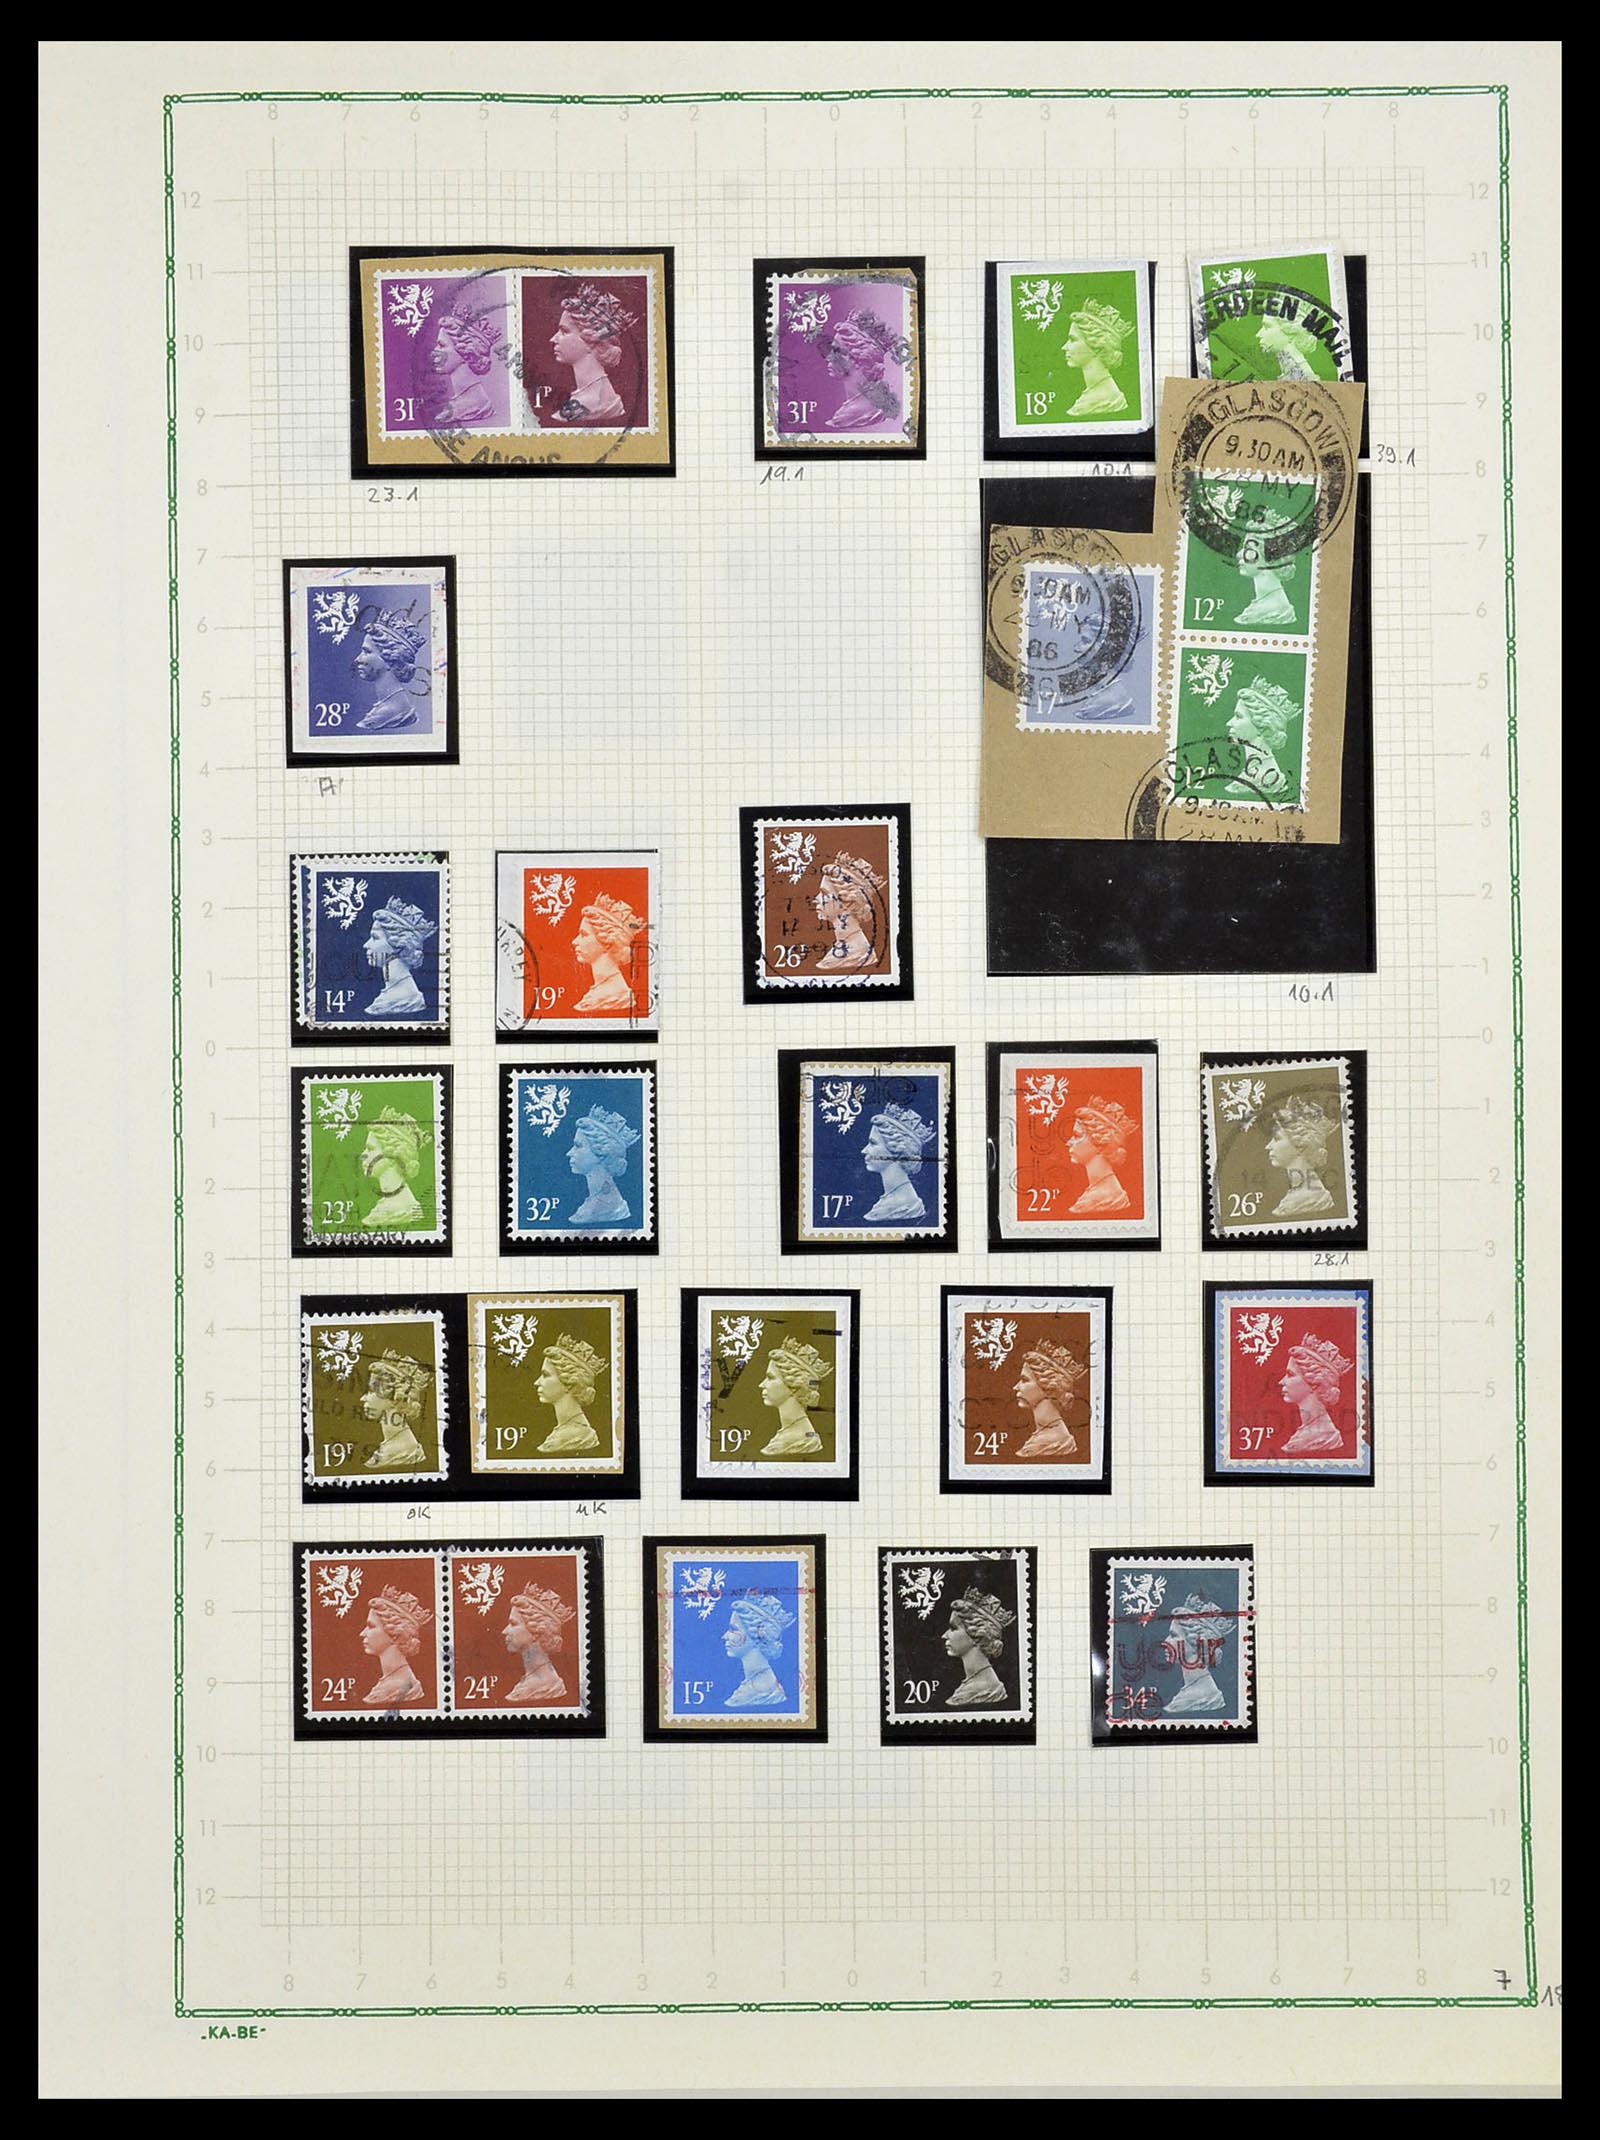 34221 030 - Stamp collection 34221 Great Britain Machins/castles 1971-2005.